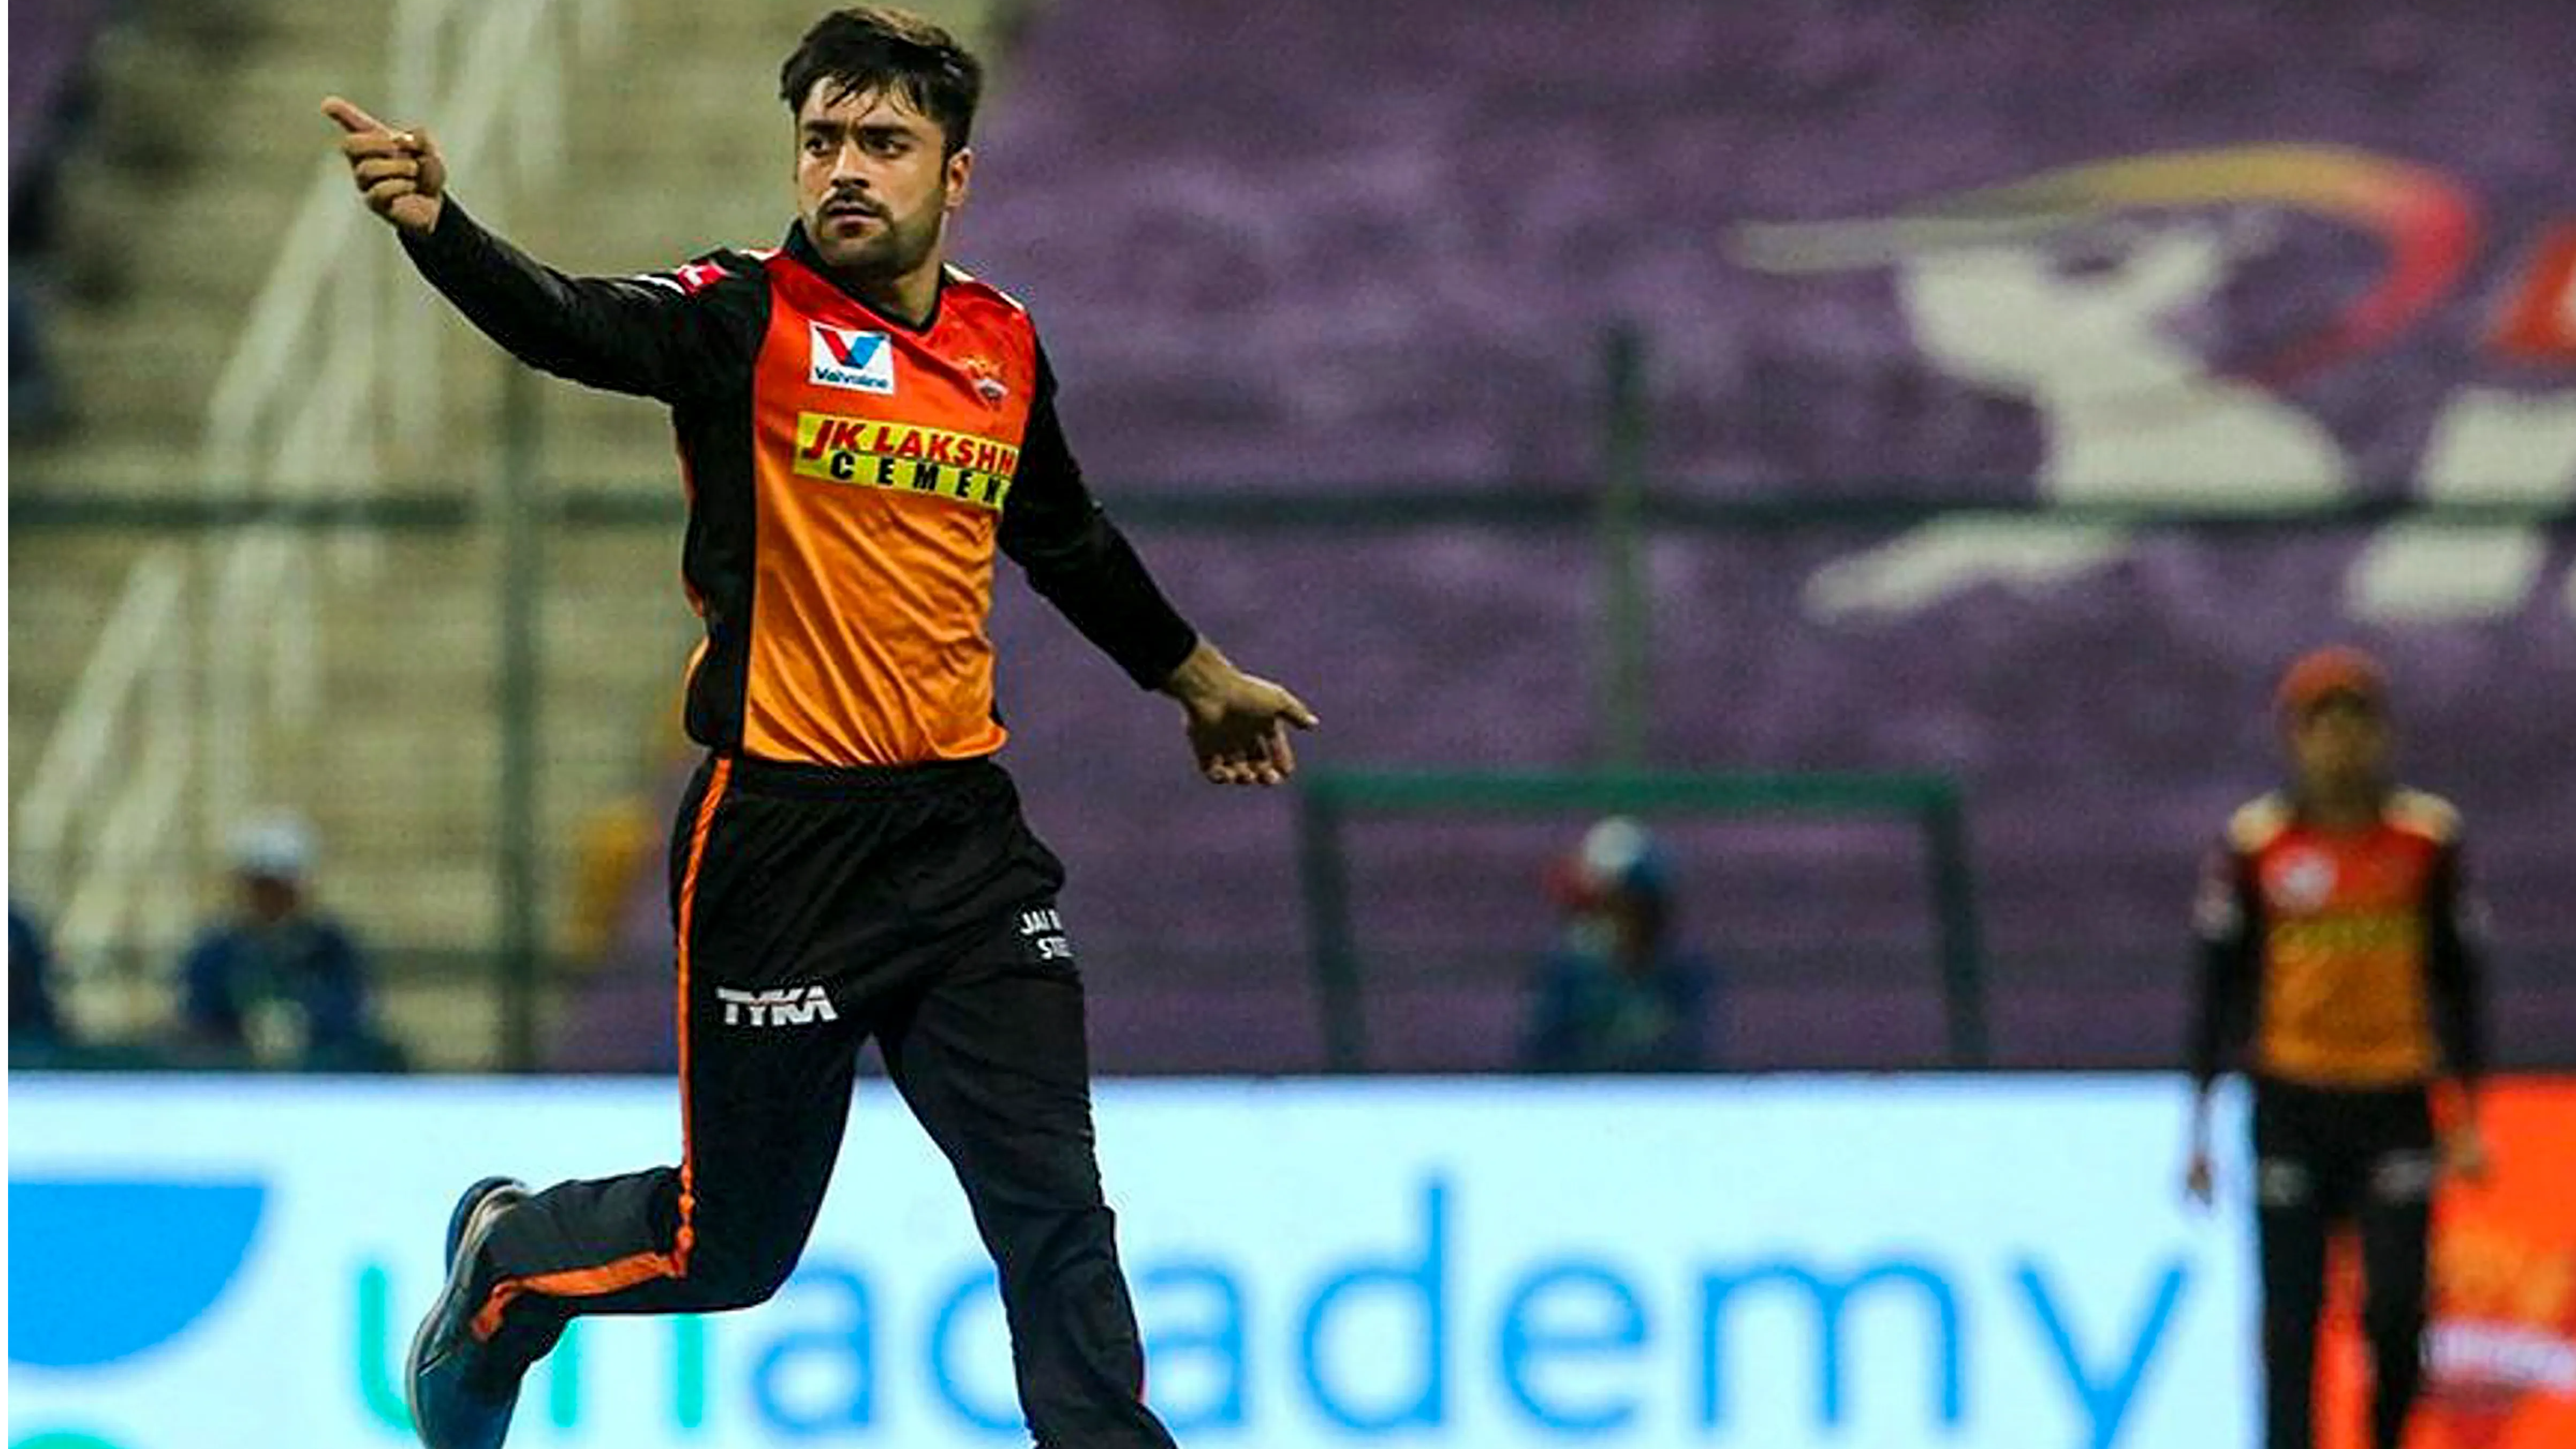 Sussex re-signs Rashid Khan for next year’s T20 Blast